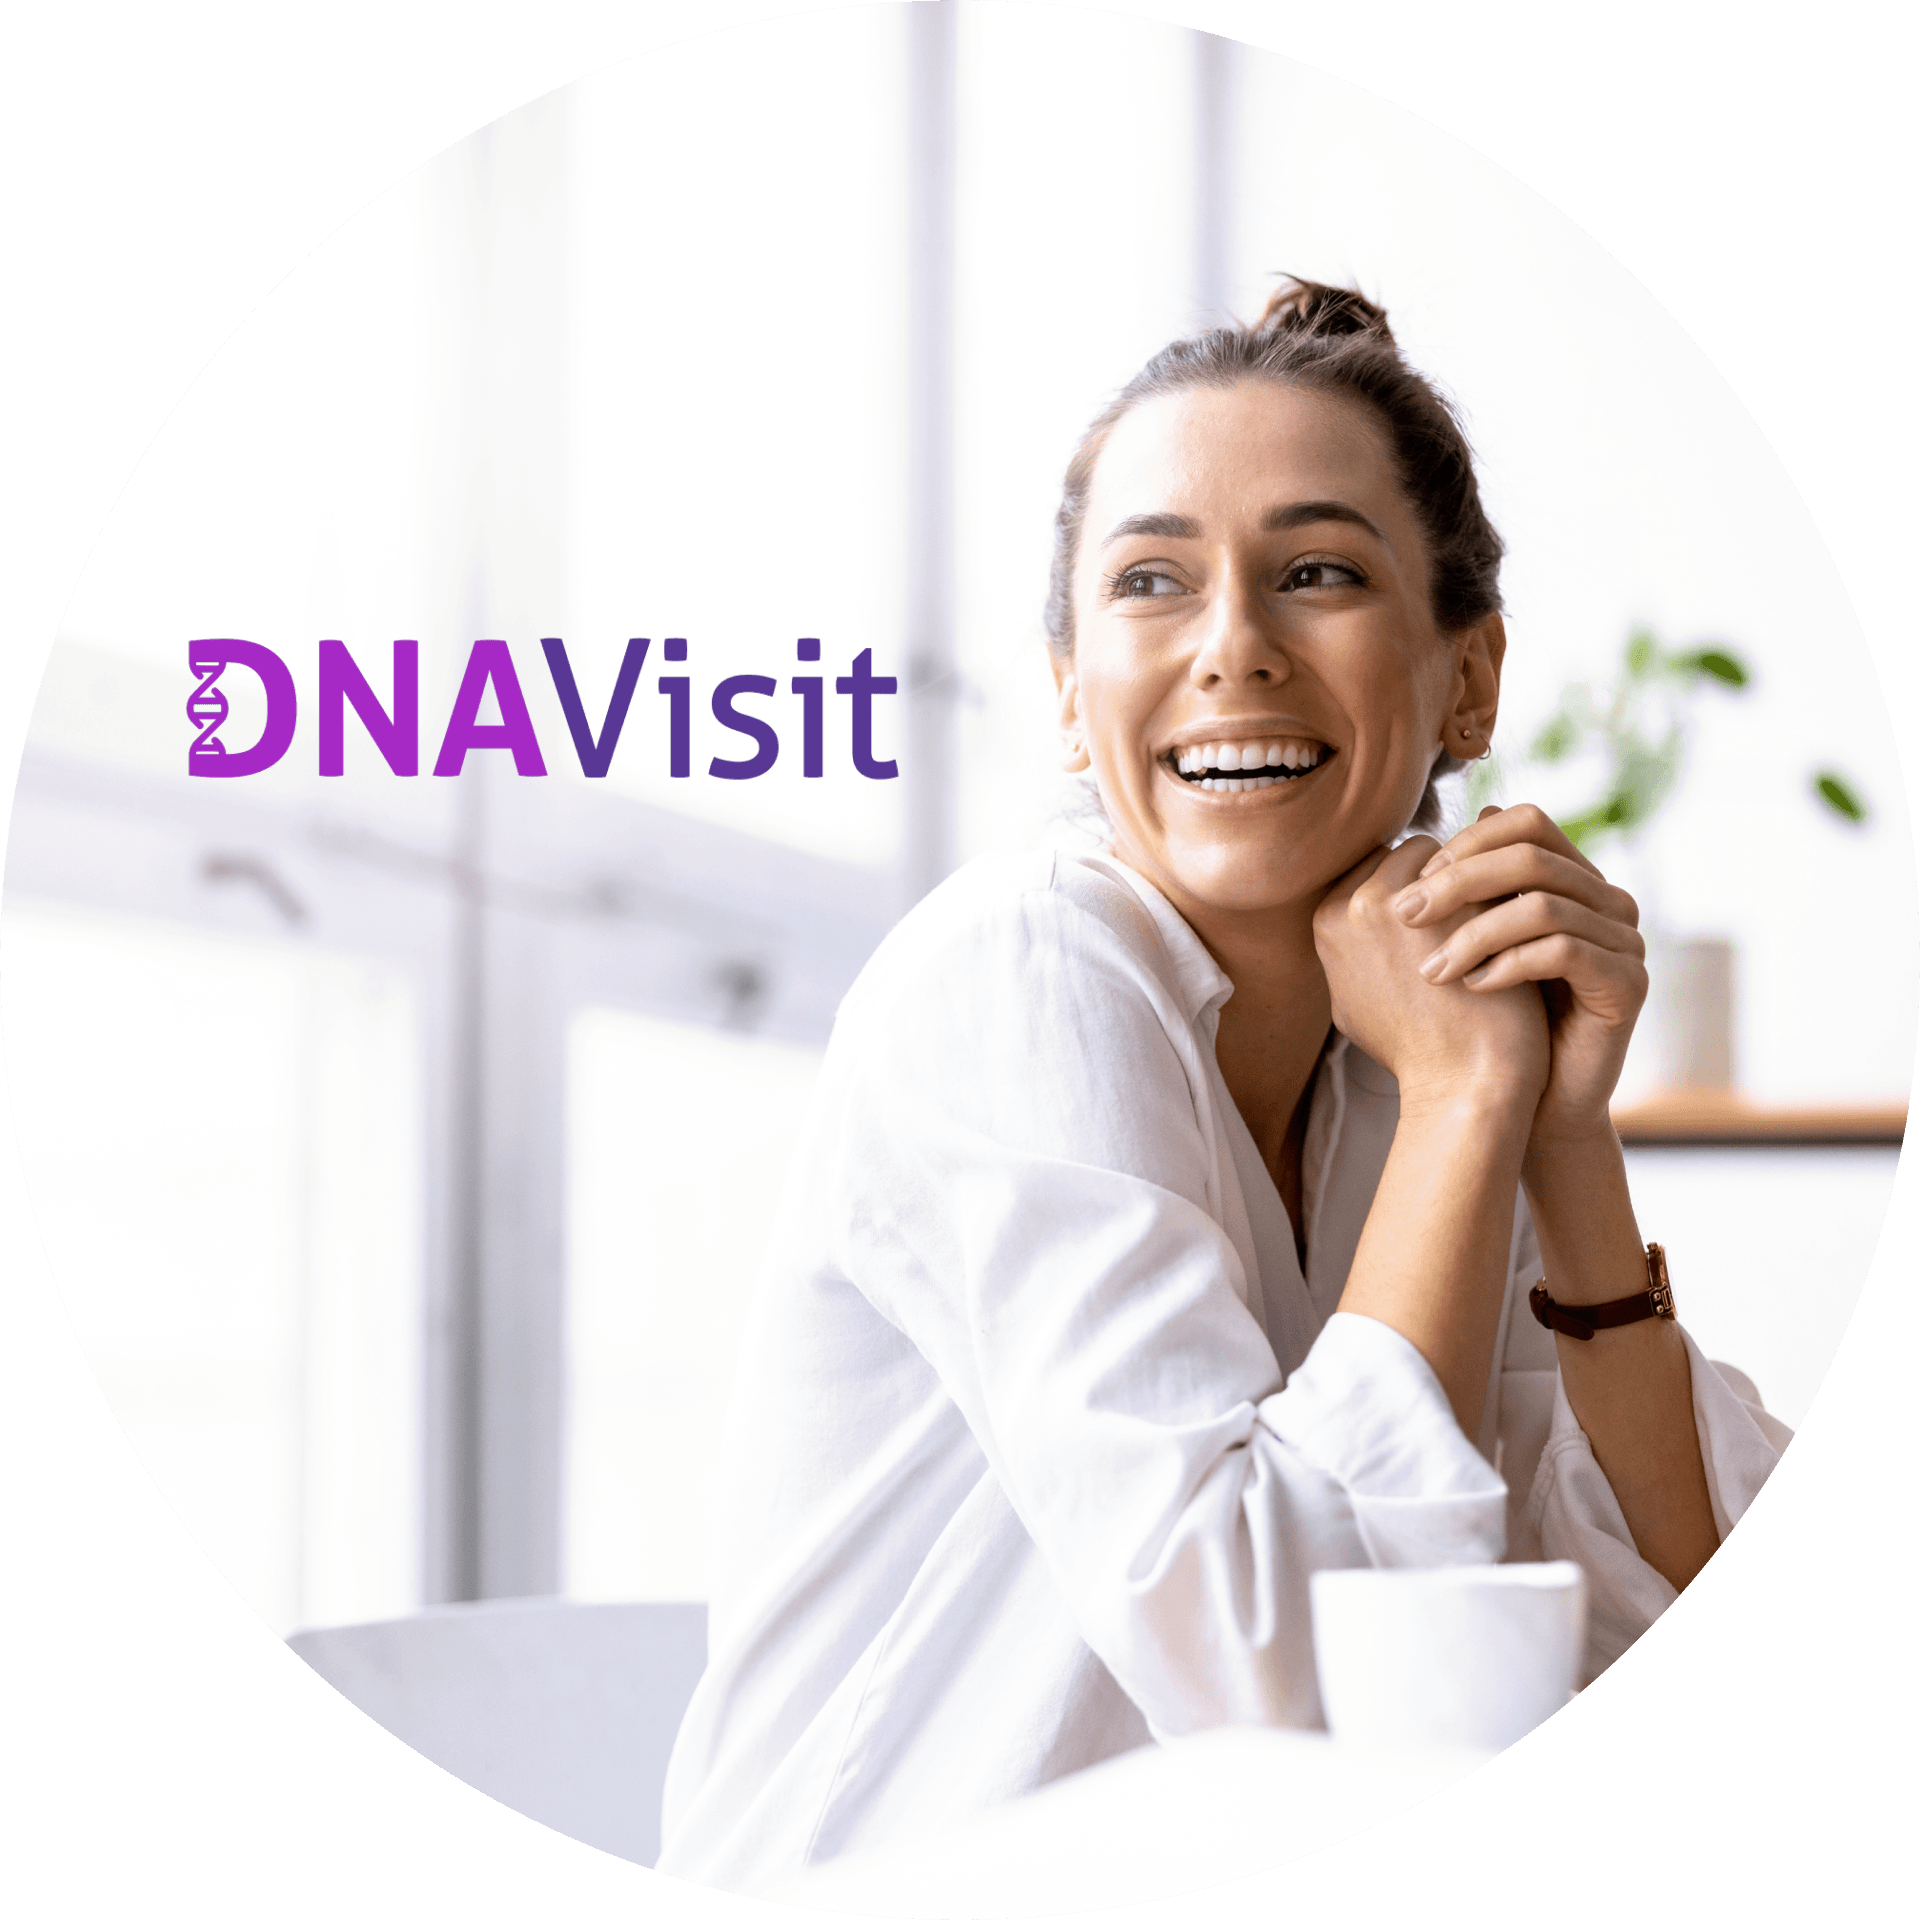 Genetic Counseling for DNA tests including 23andMe